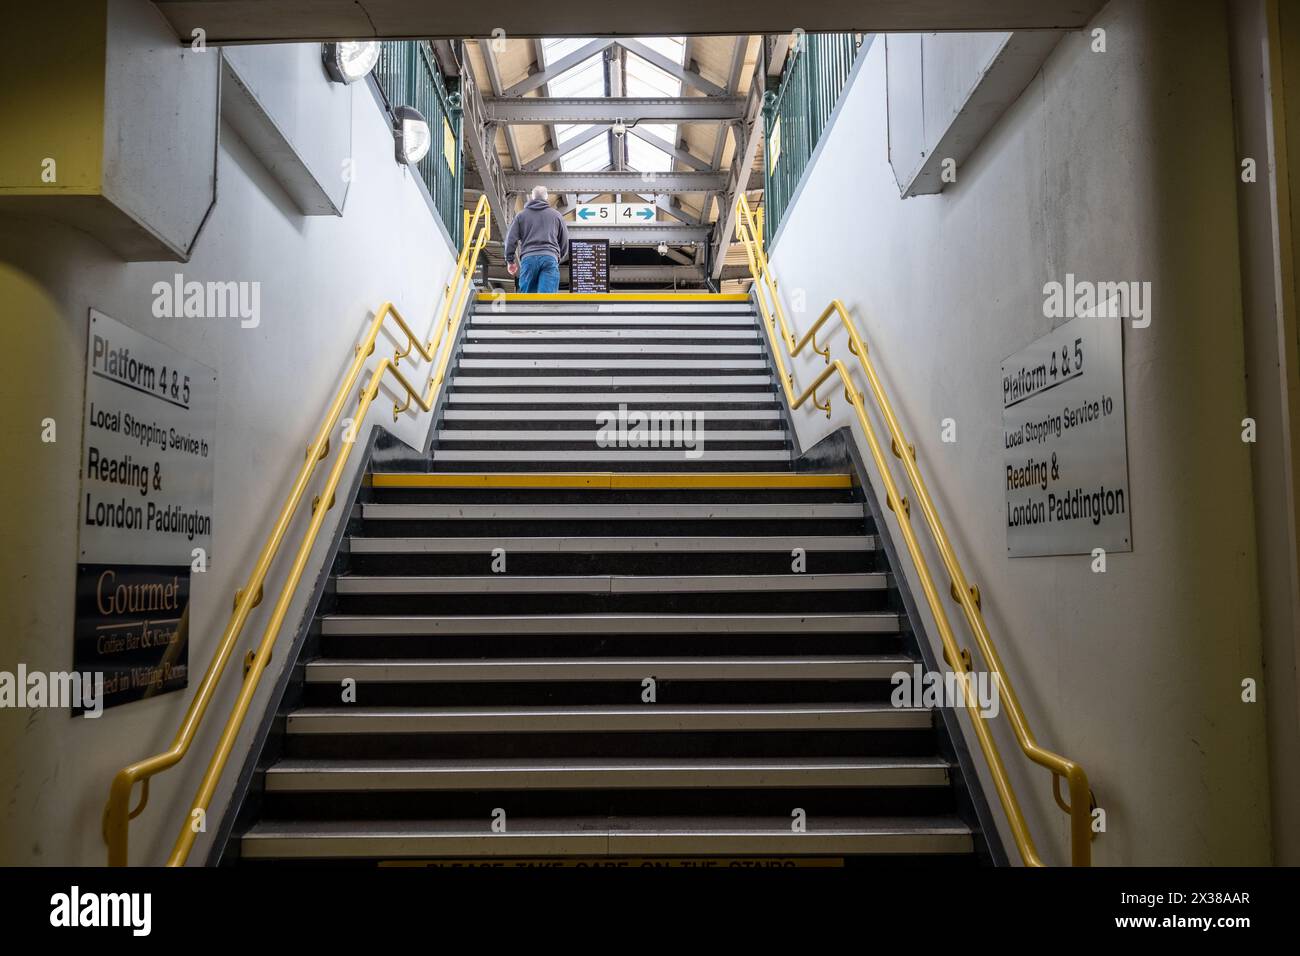 Staircase leading up to platform 4 and 5 - London and Reading trains Stock Photo